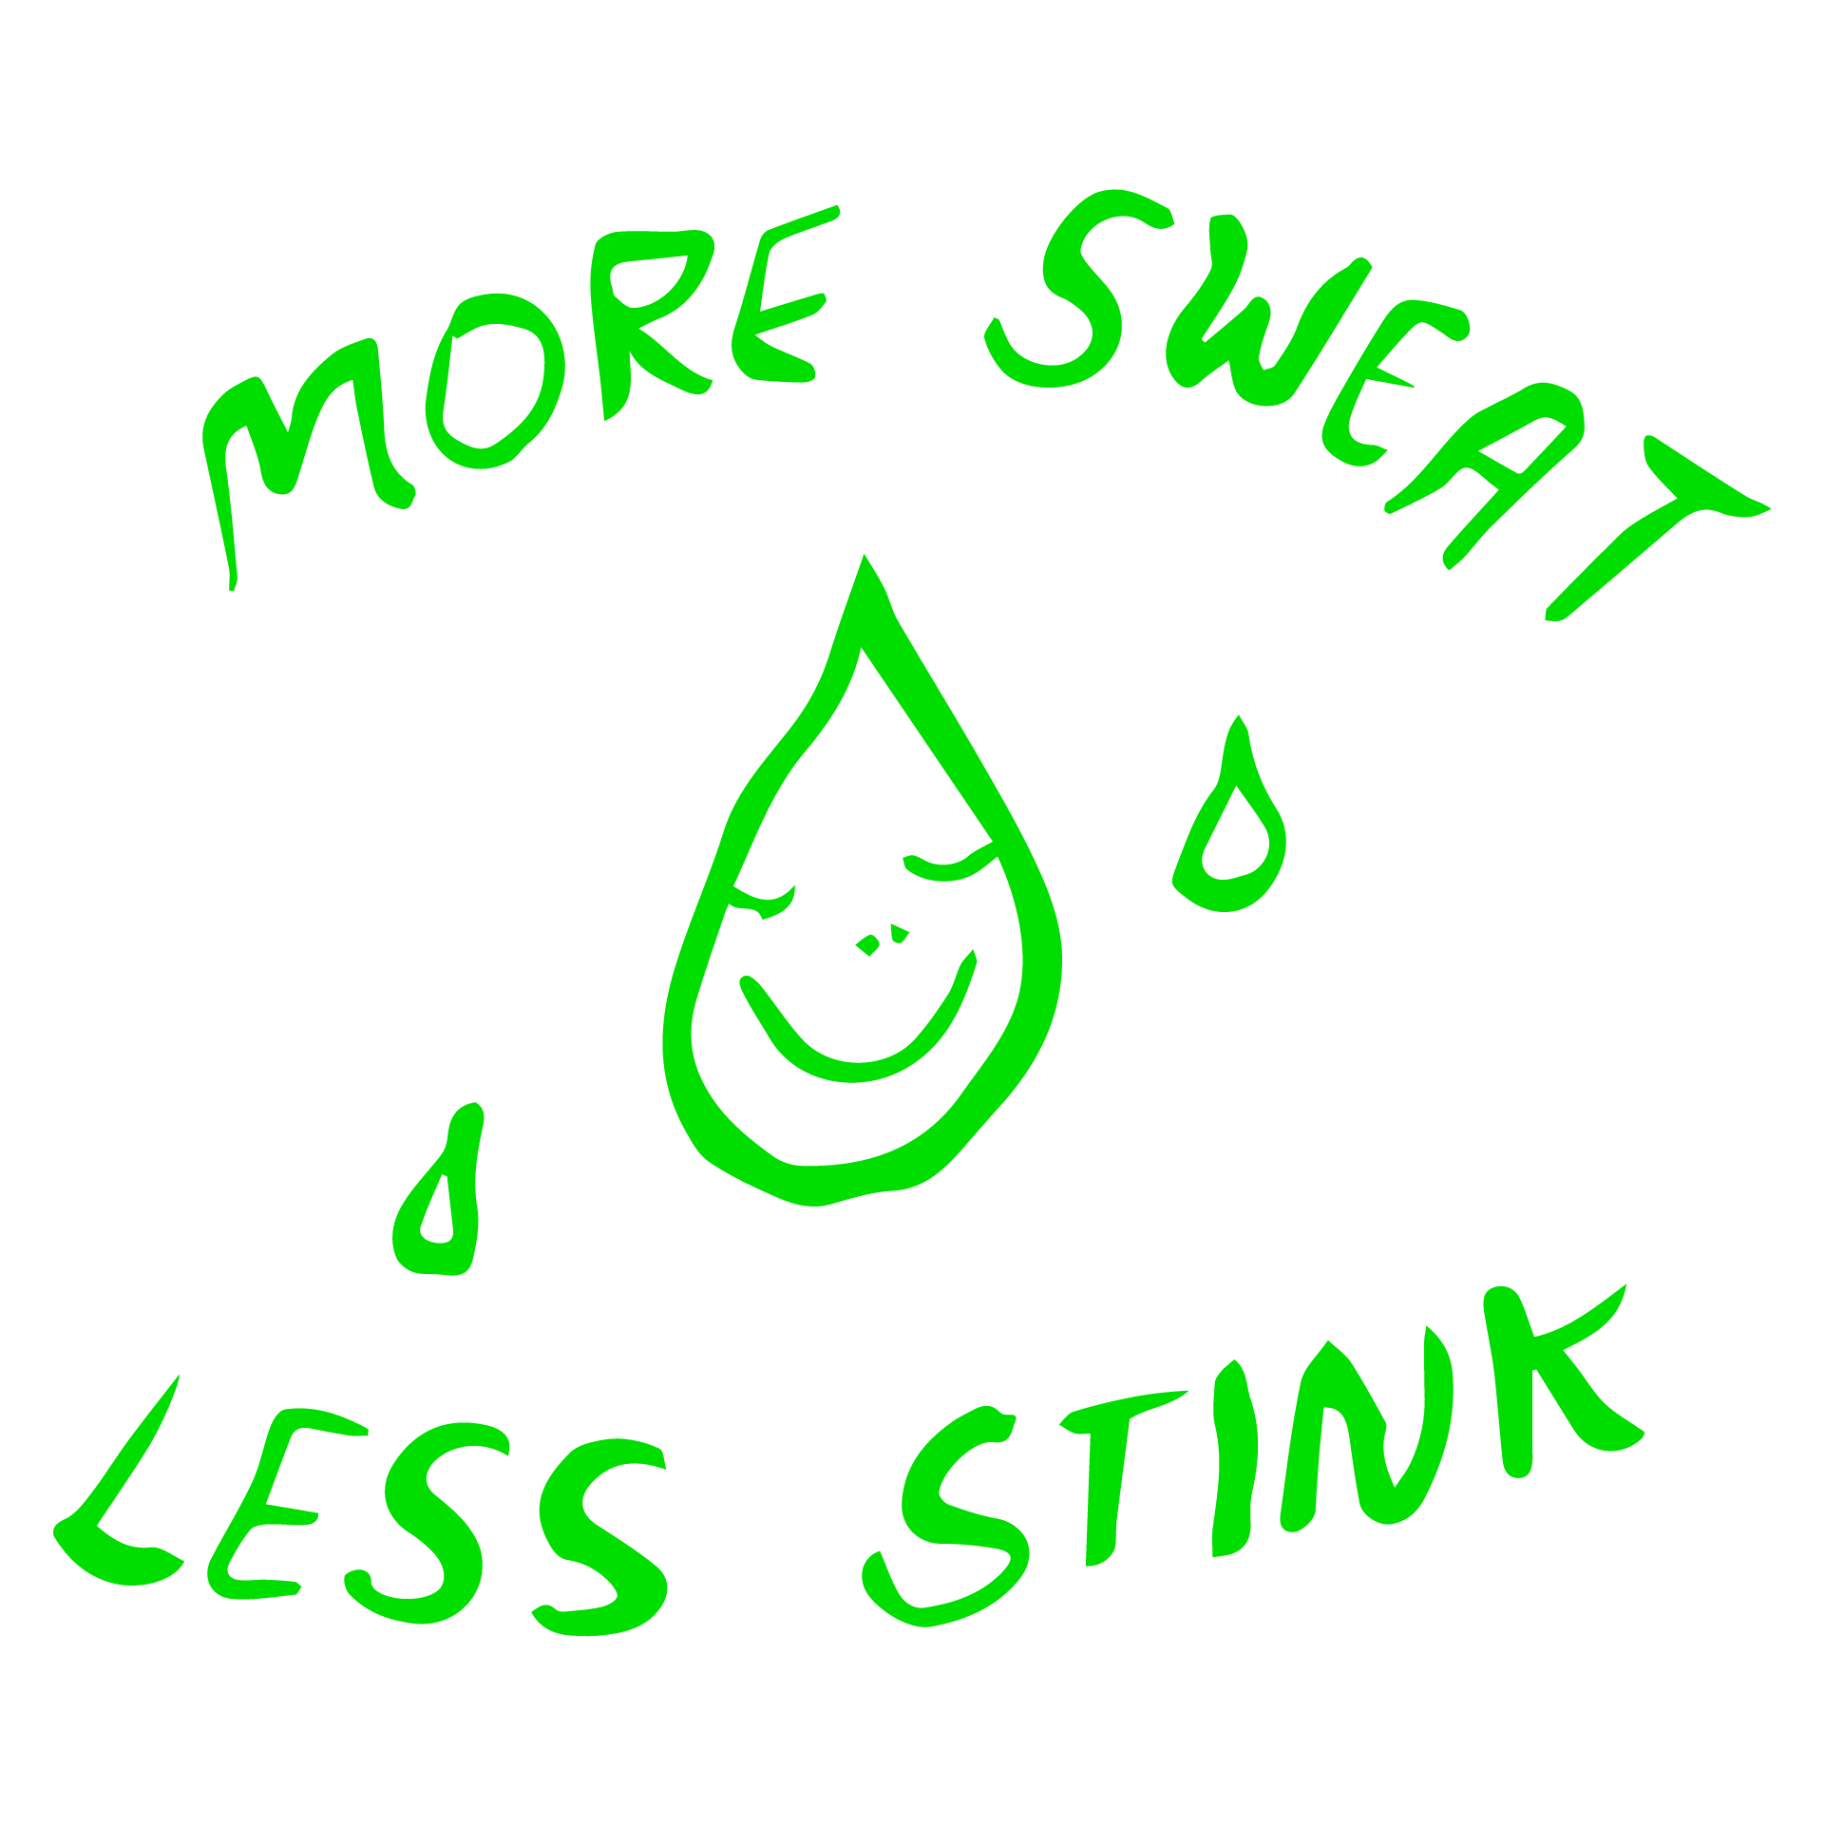 A message that says: more sweat less stink